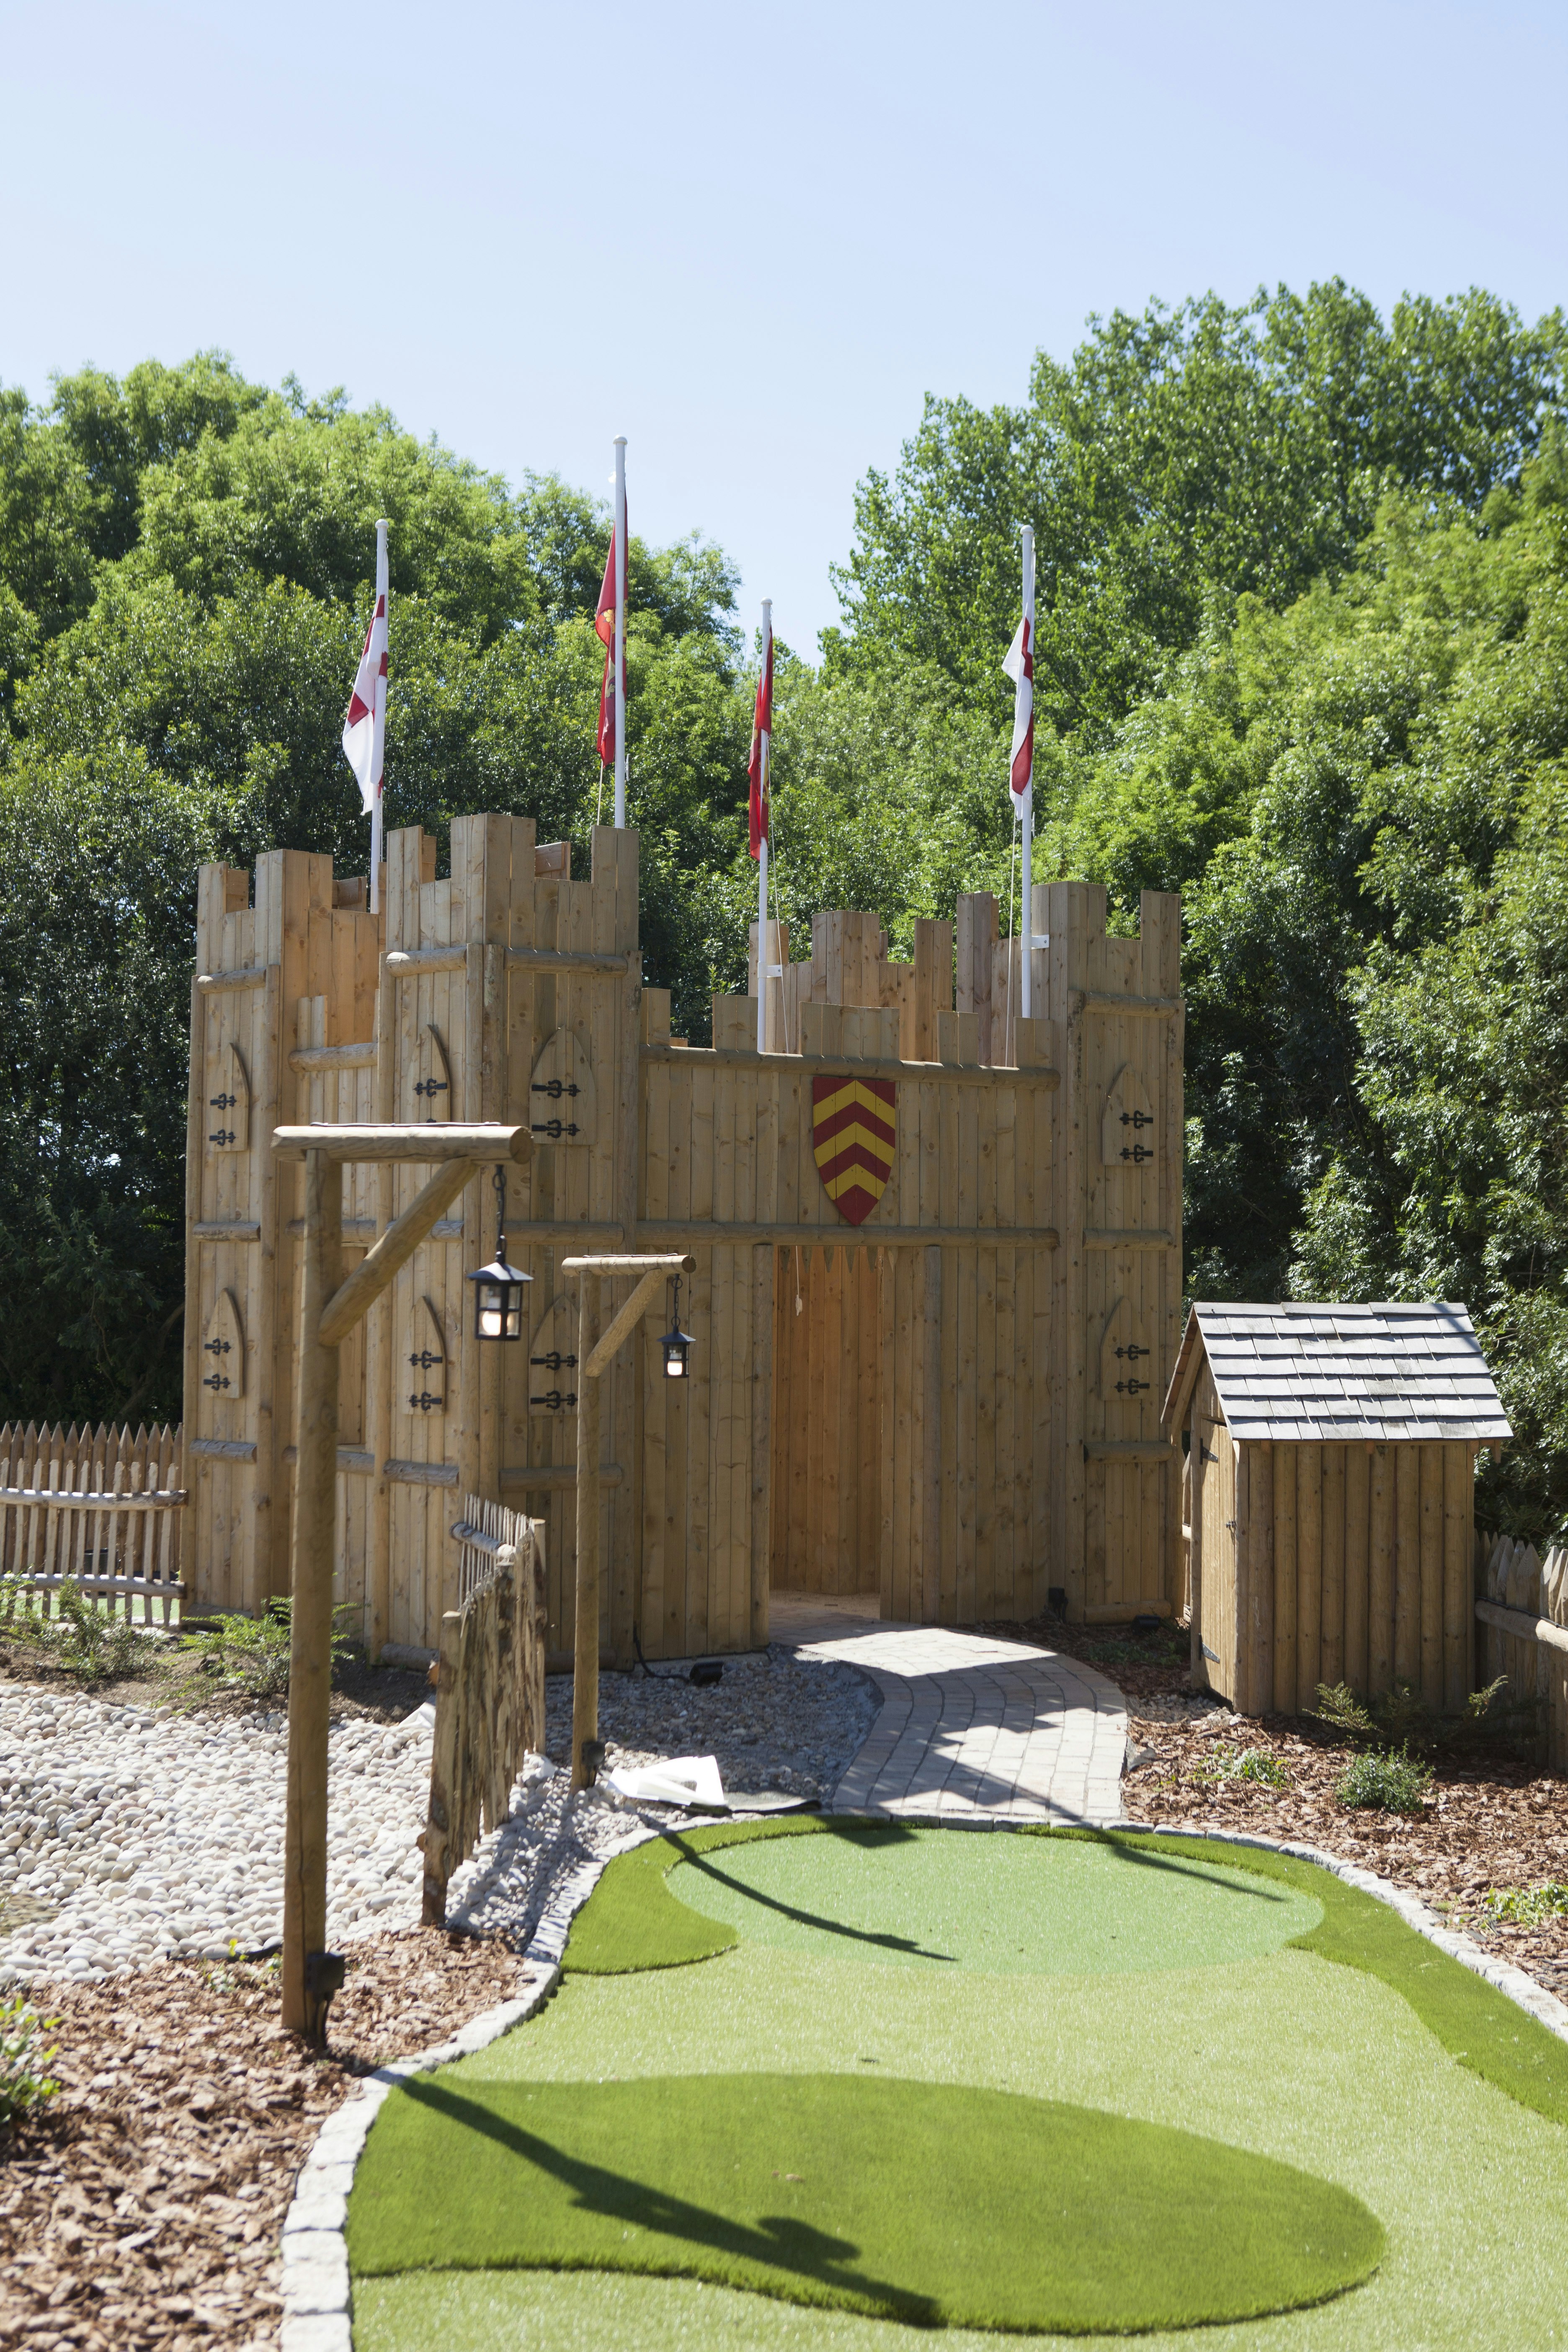 Golf World Stansted - Adventure Golf Course image 4